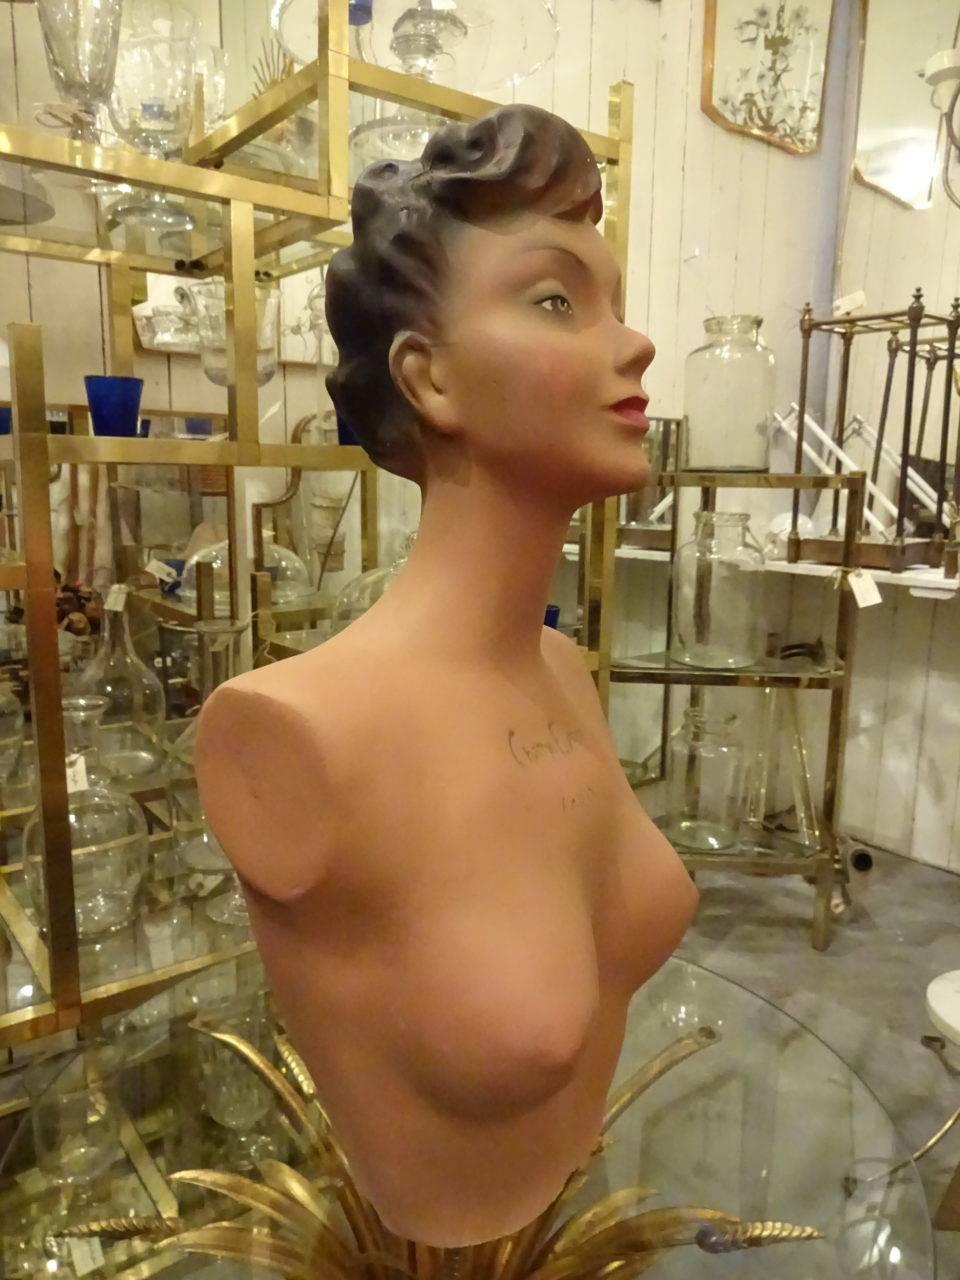 Elegant vintage bust / shop dummy from the glamour of 1920-30s’ France. Originally used to display wares in a former department store on Paris’ famous main street Avenue des Champs-Élysées.  Made of plaster, then painted over, with very lifelike and